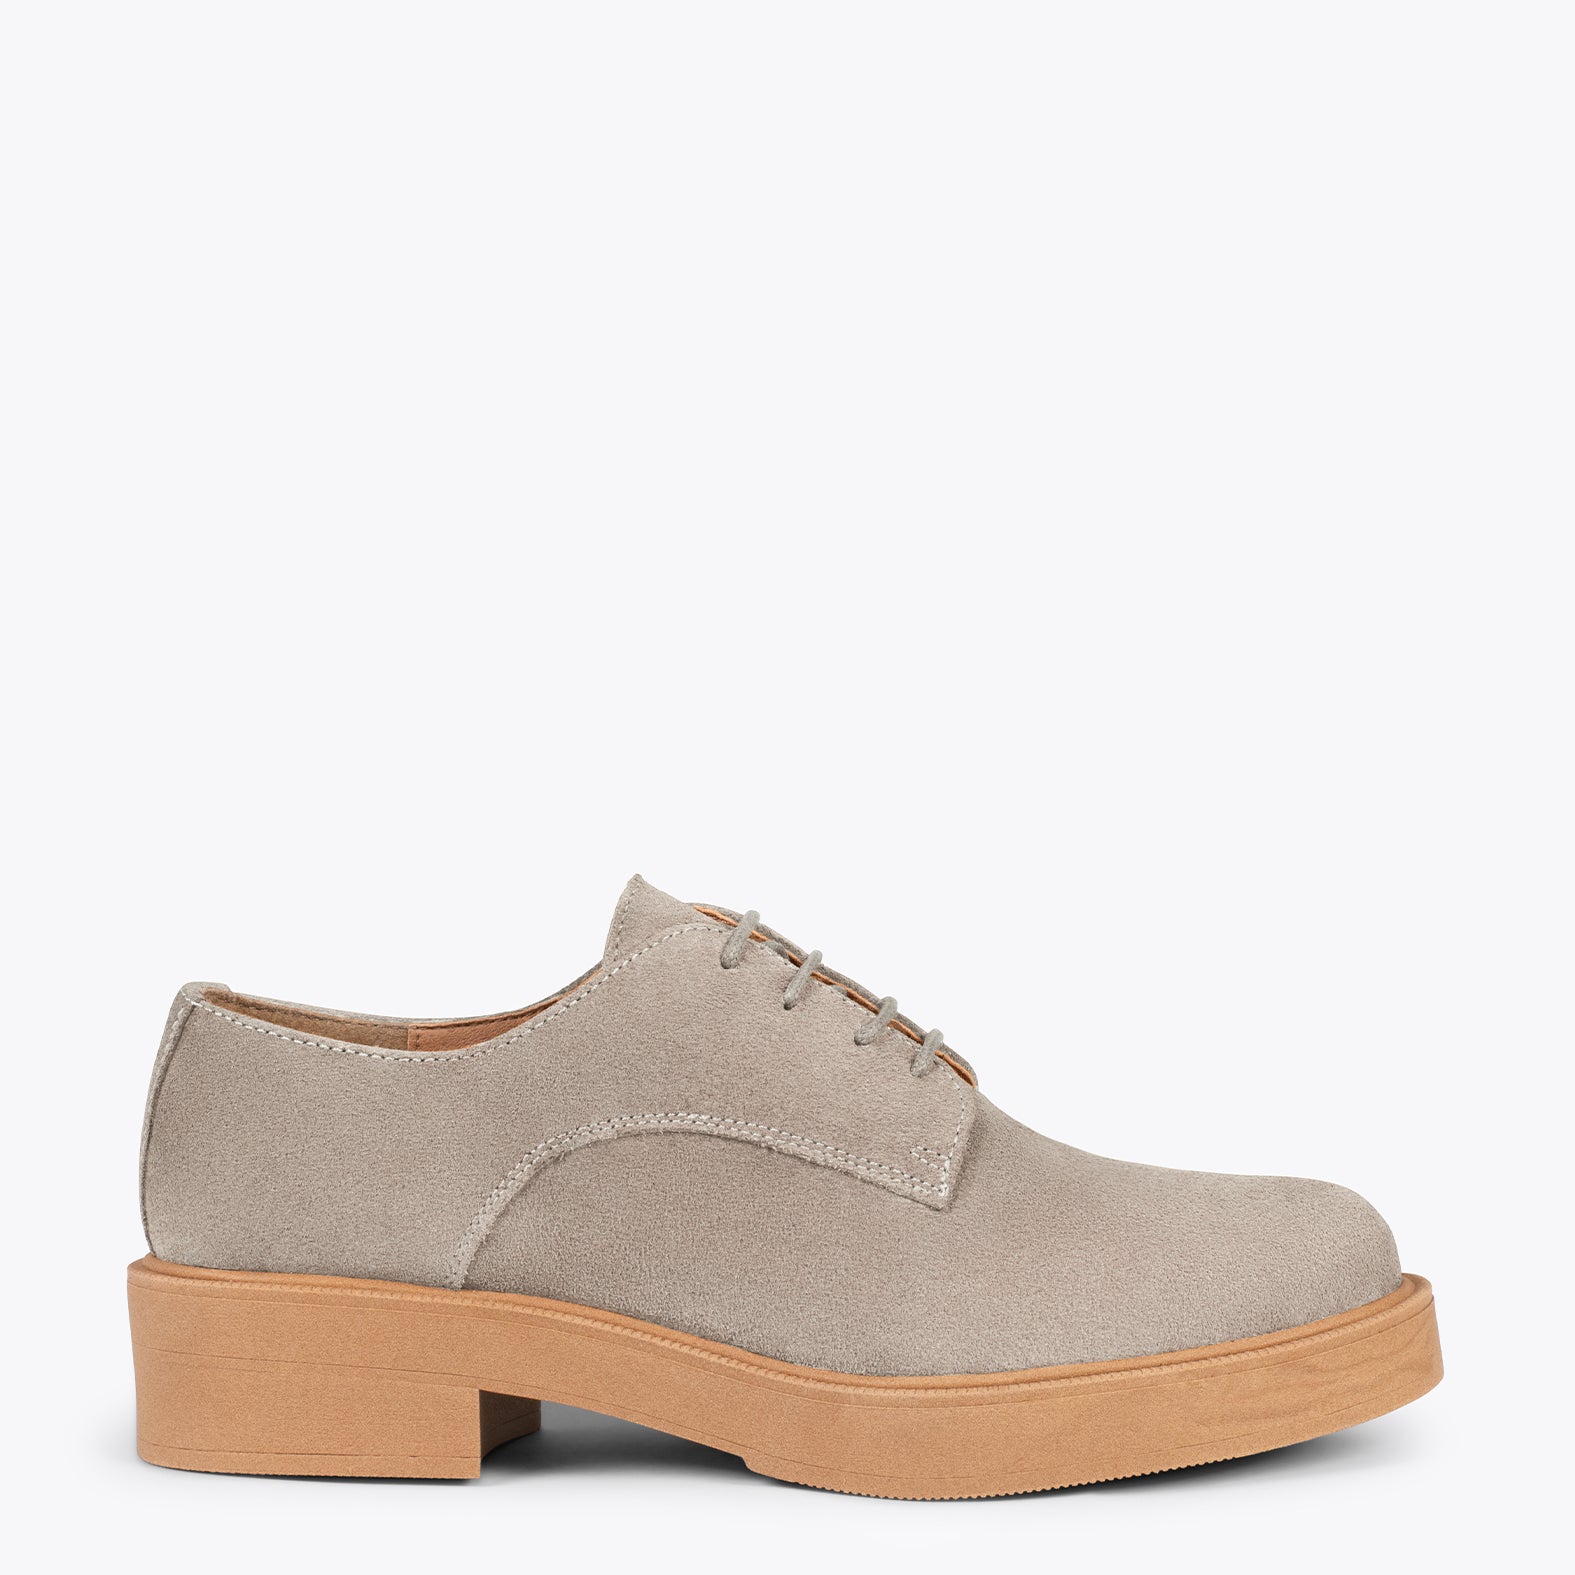 BLUCHER – GREY classic flats with laces